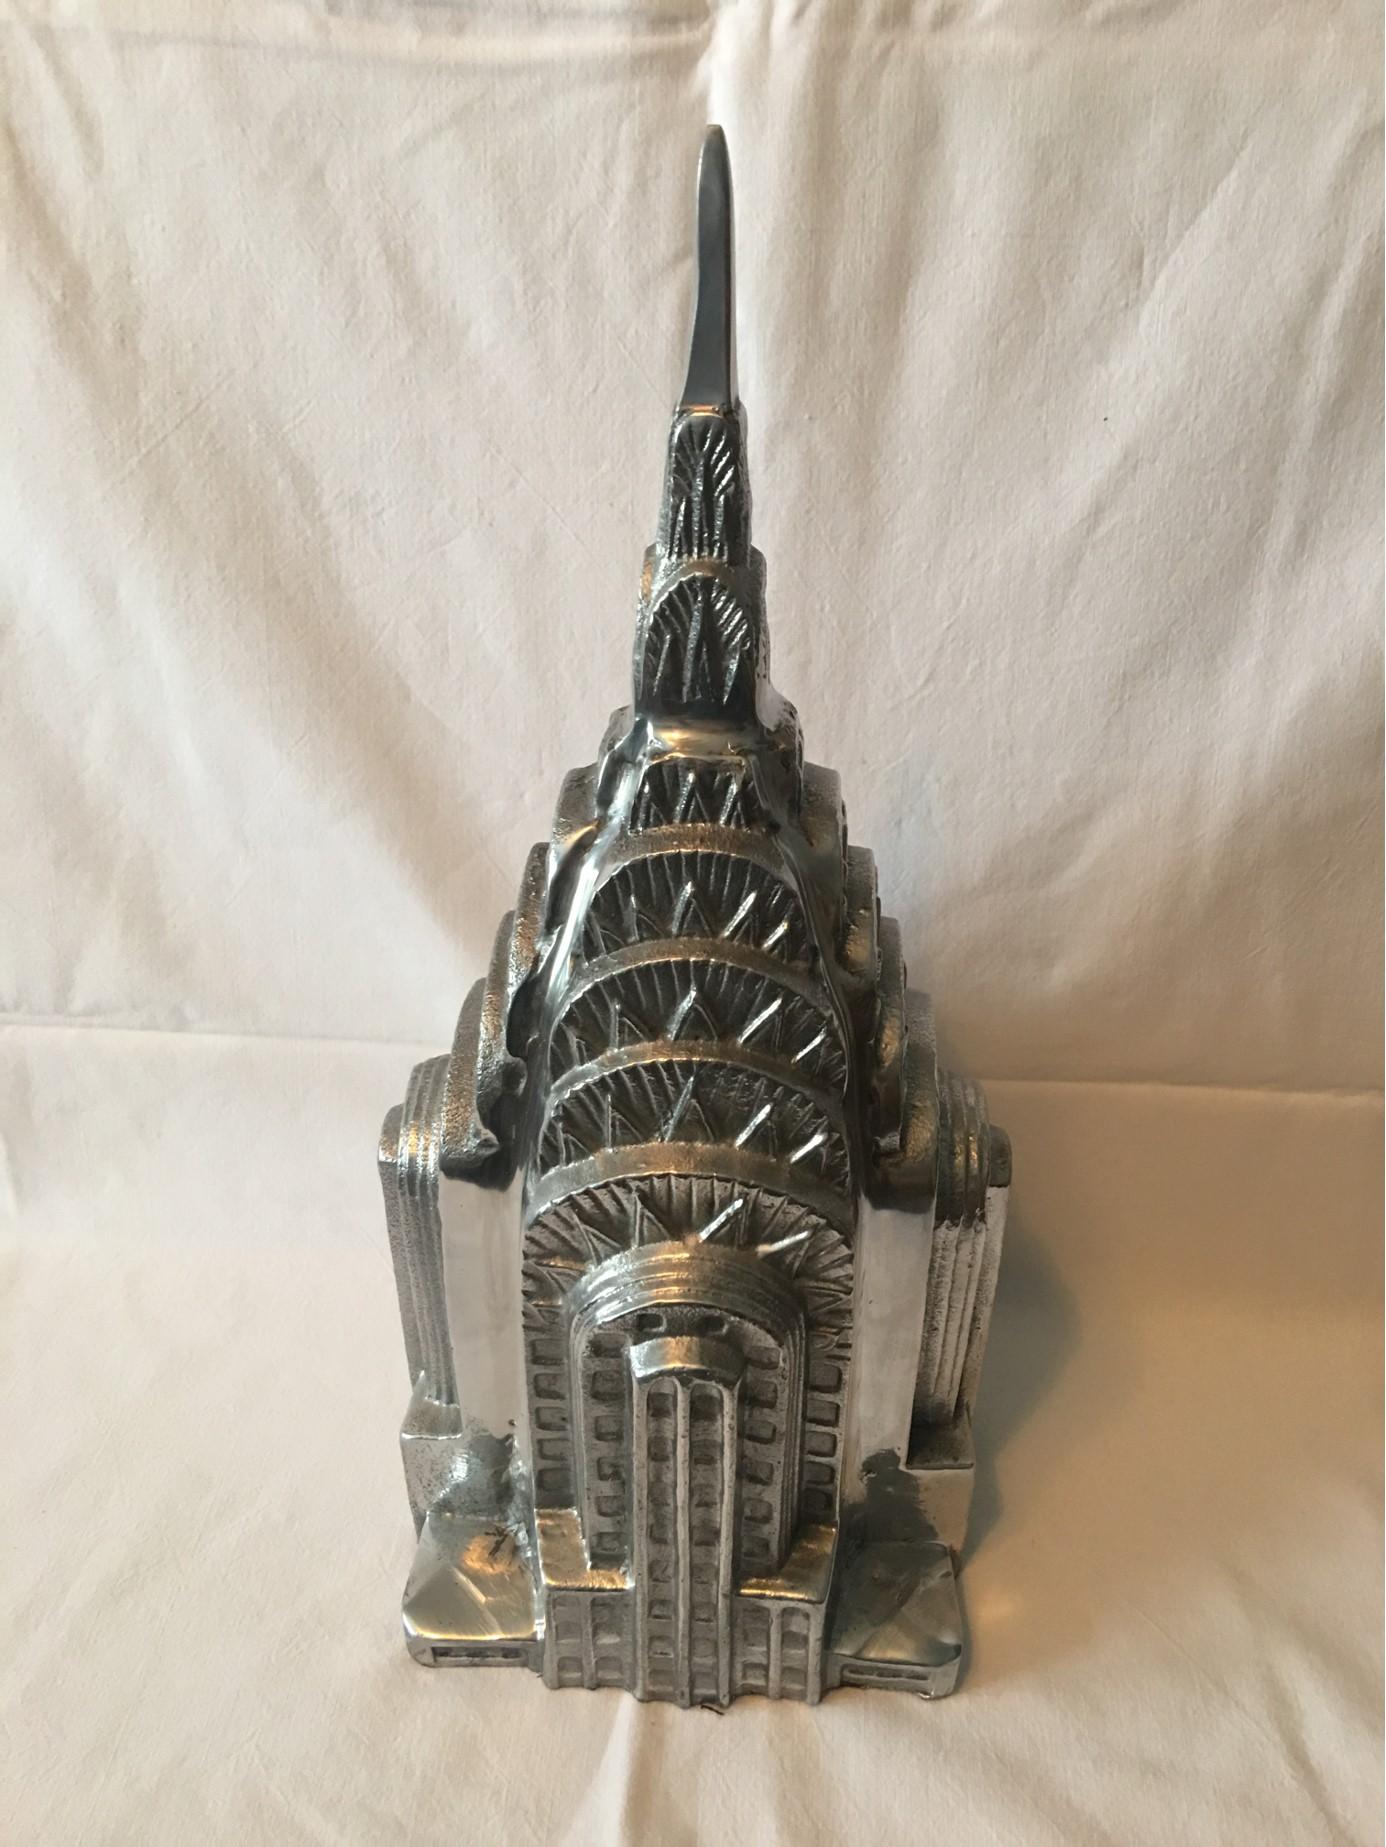  New York Souvenir Chrysler Building Top Made of Aluminum from the 1970s 4